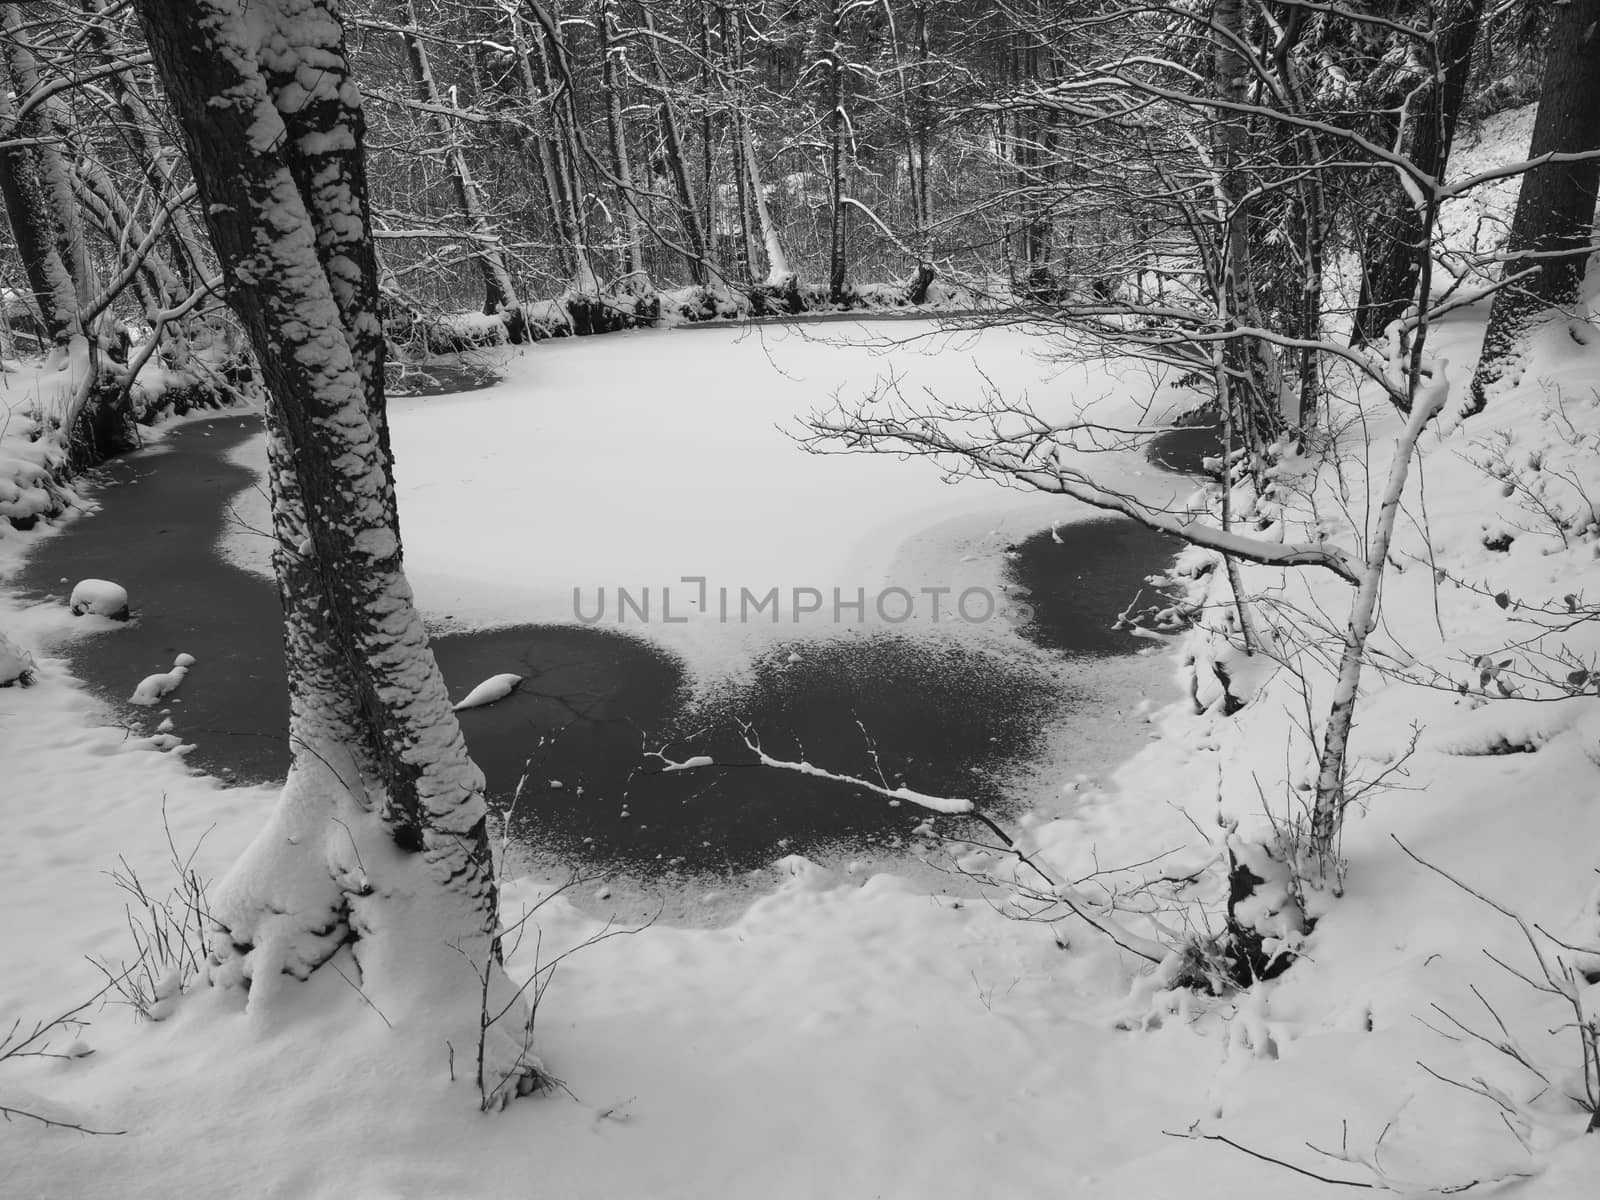 snow covered frozen forest lake or pond surrounded by woods, black and white winter landscape.